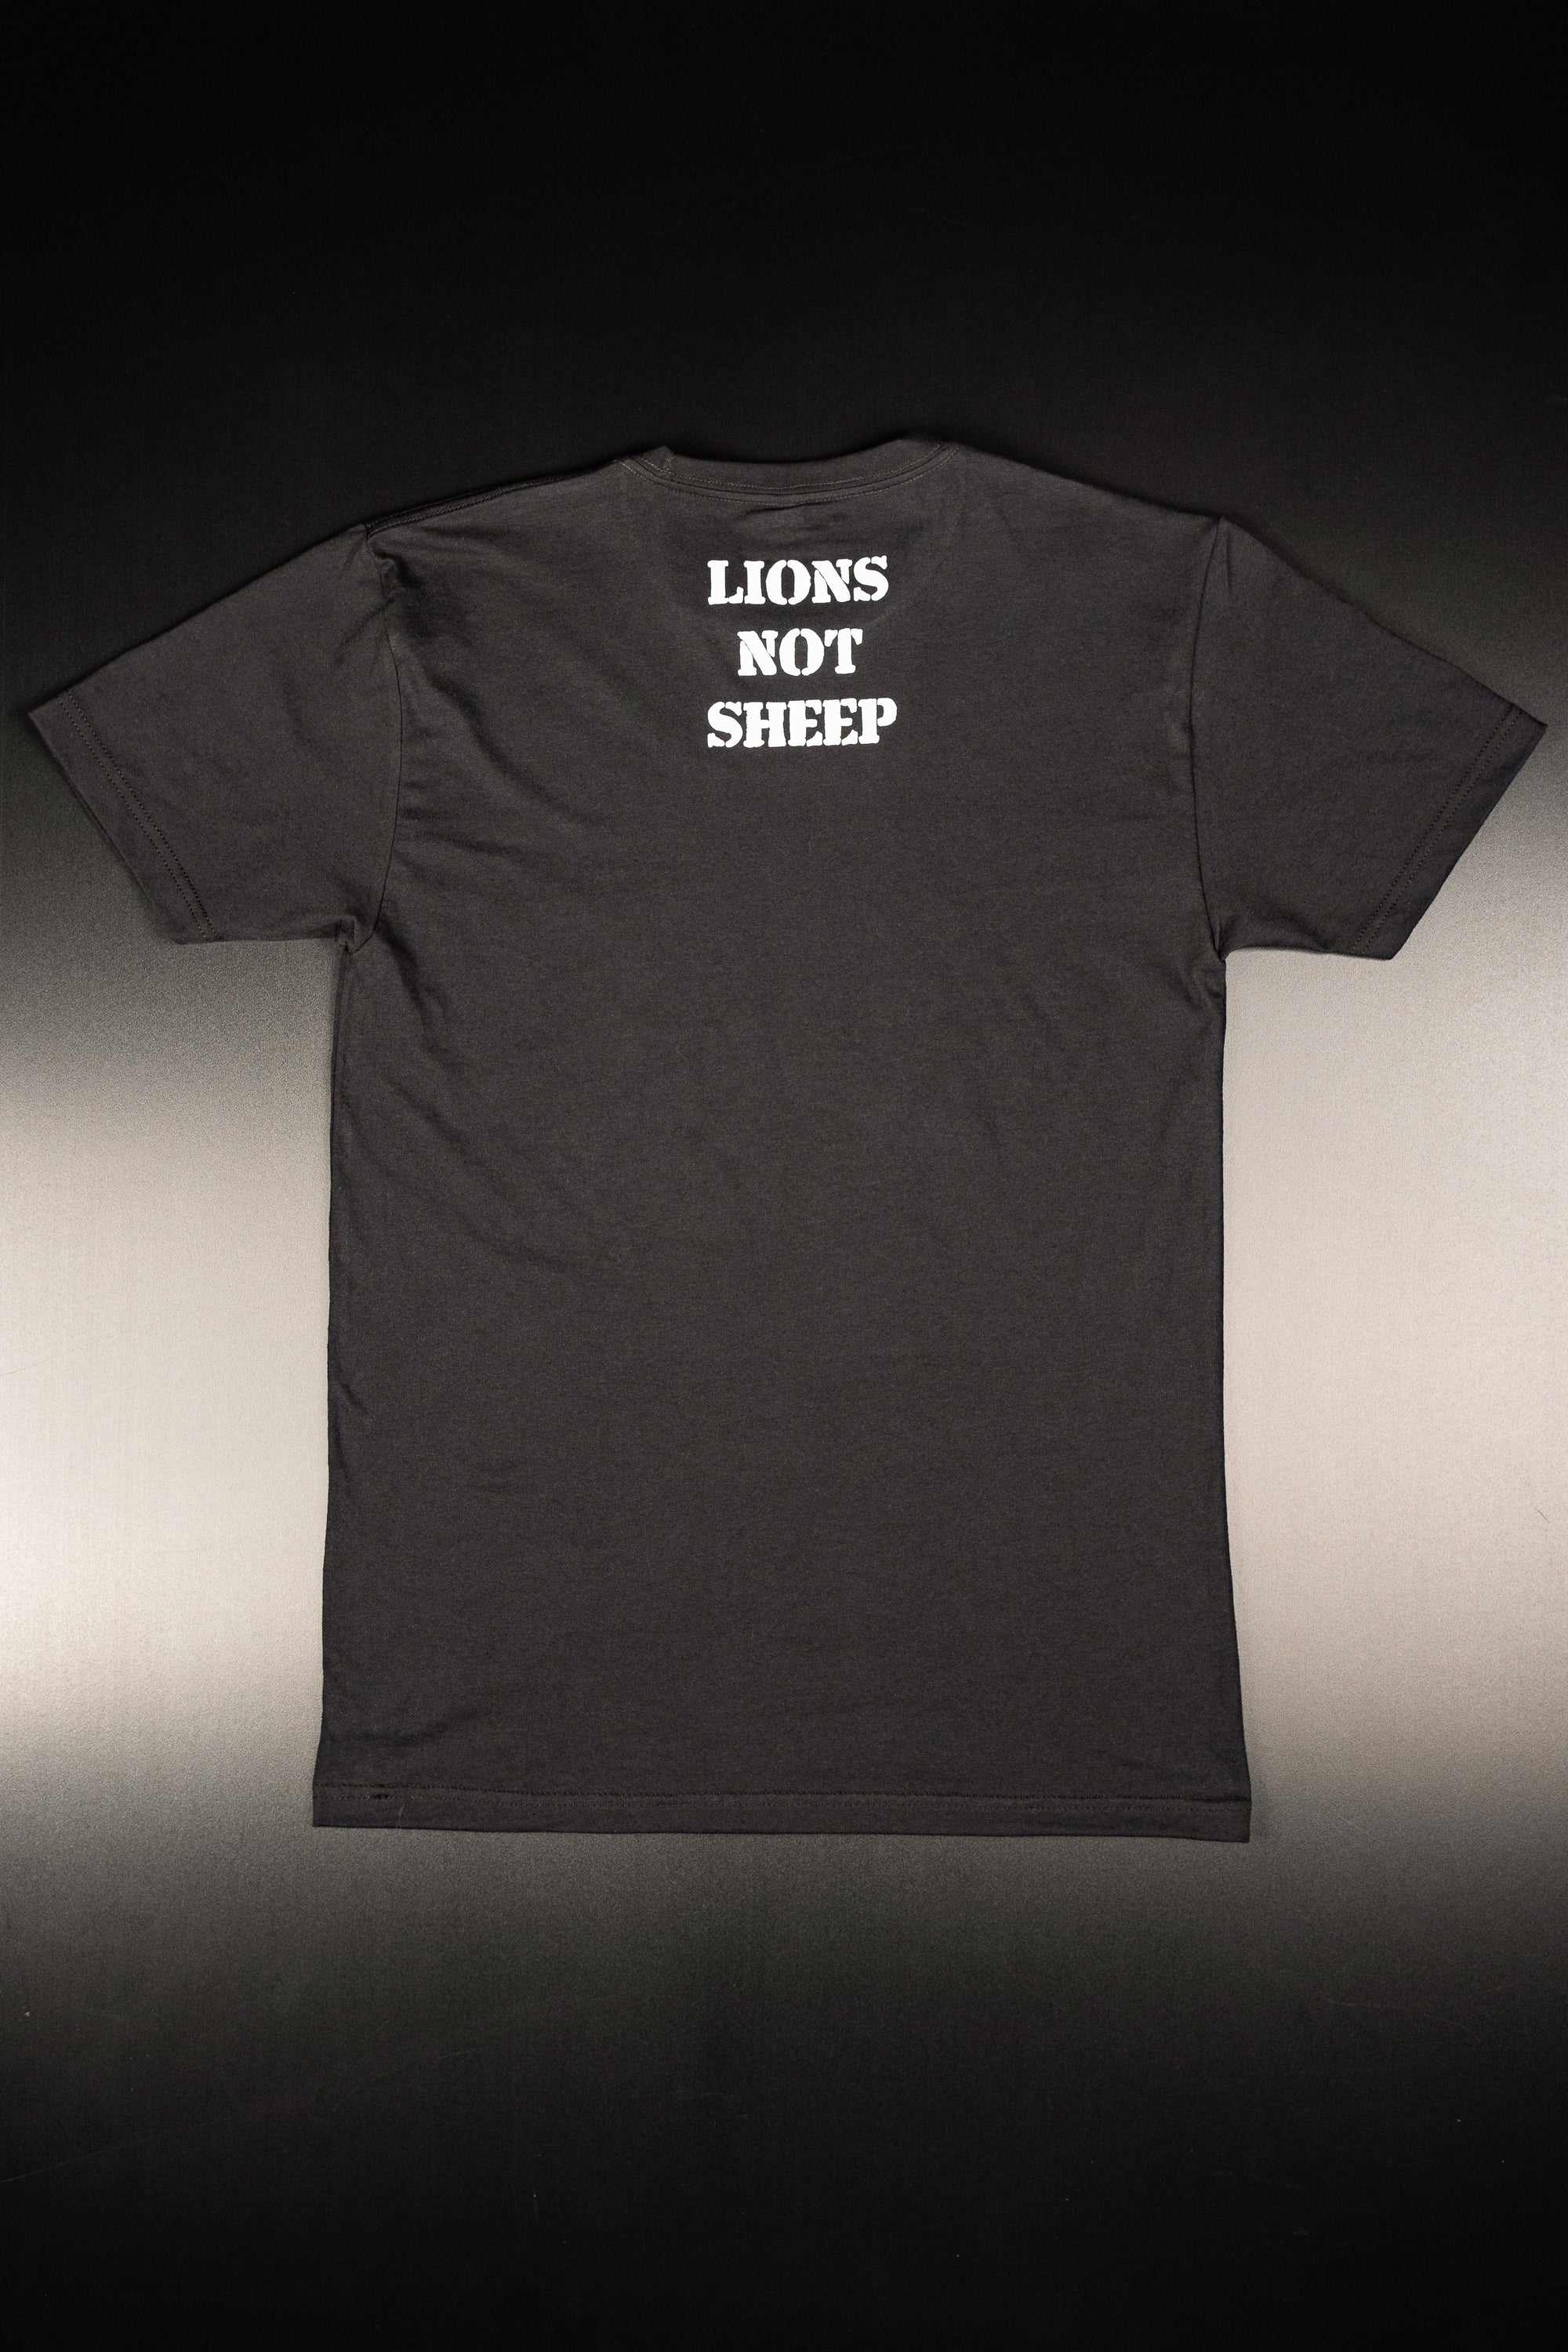 Lions Not Sheep "Liberty or Death" Tee - Lions Not Sheep ®